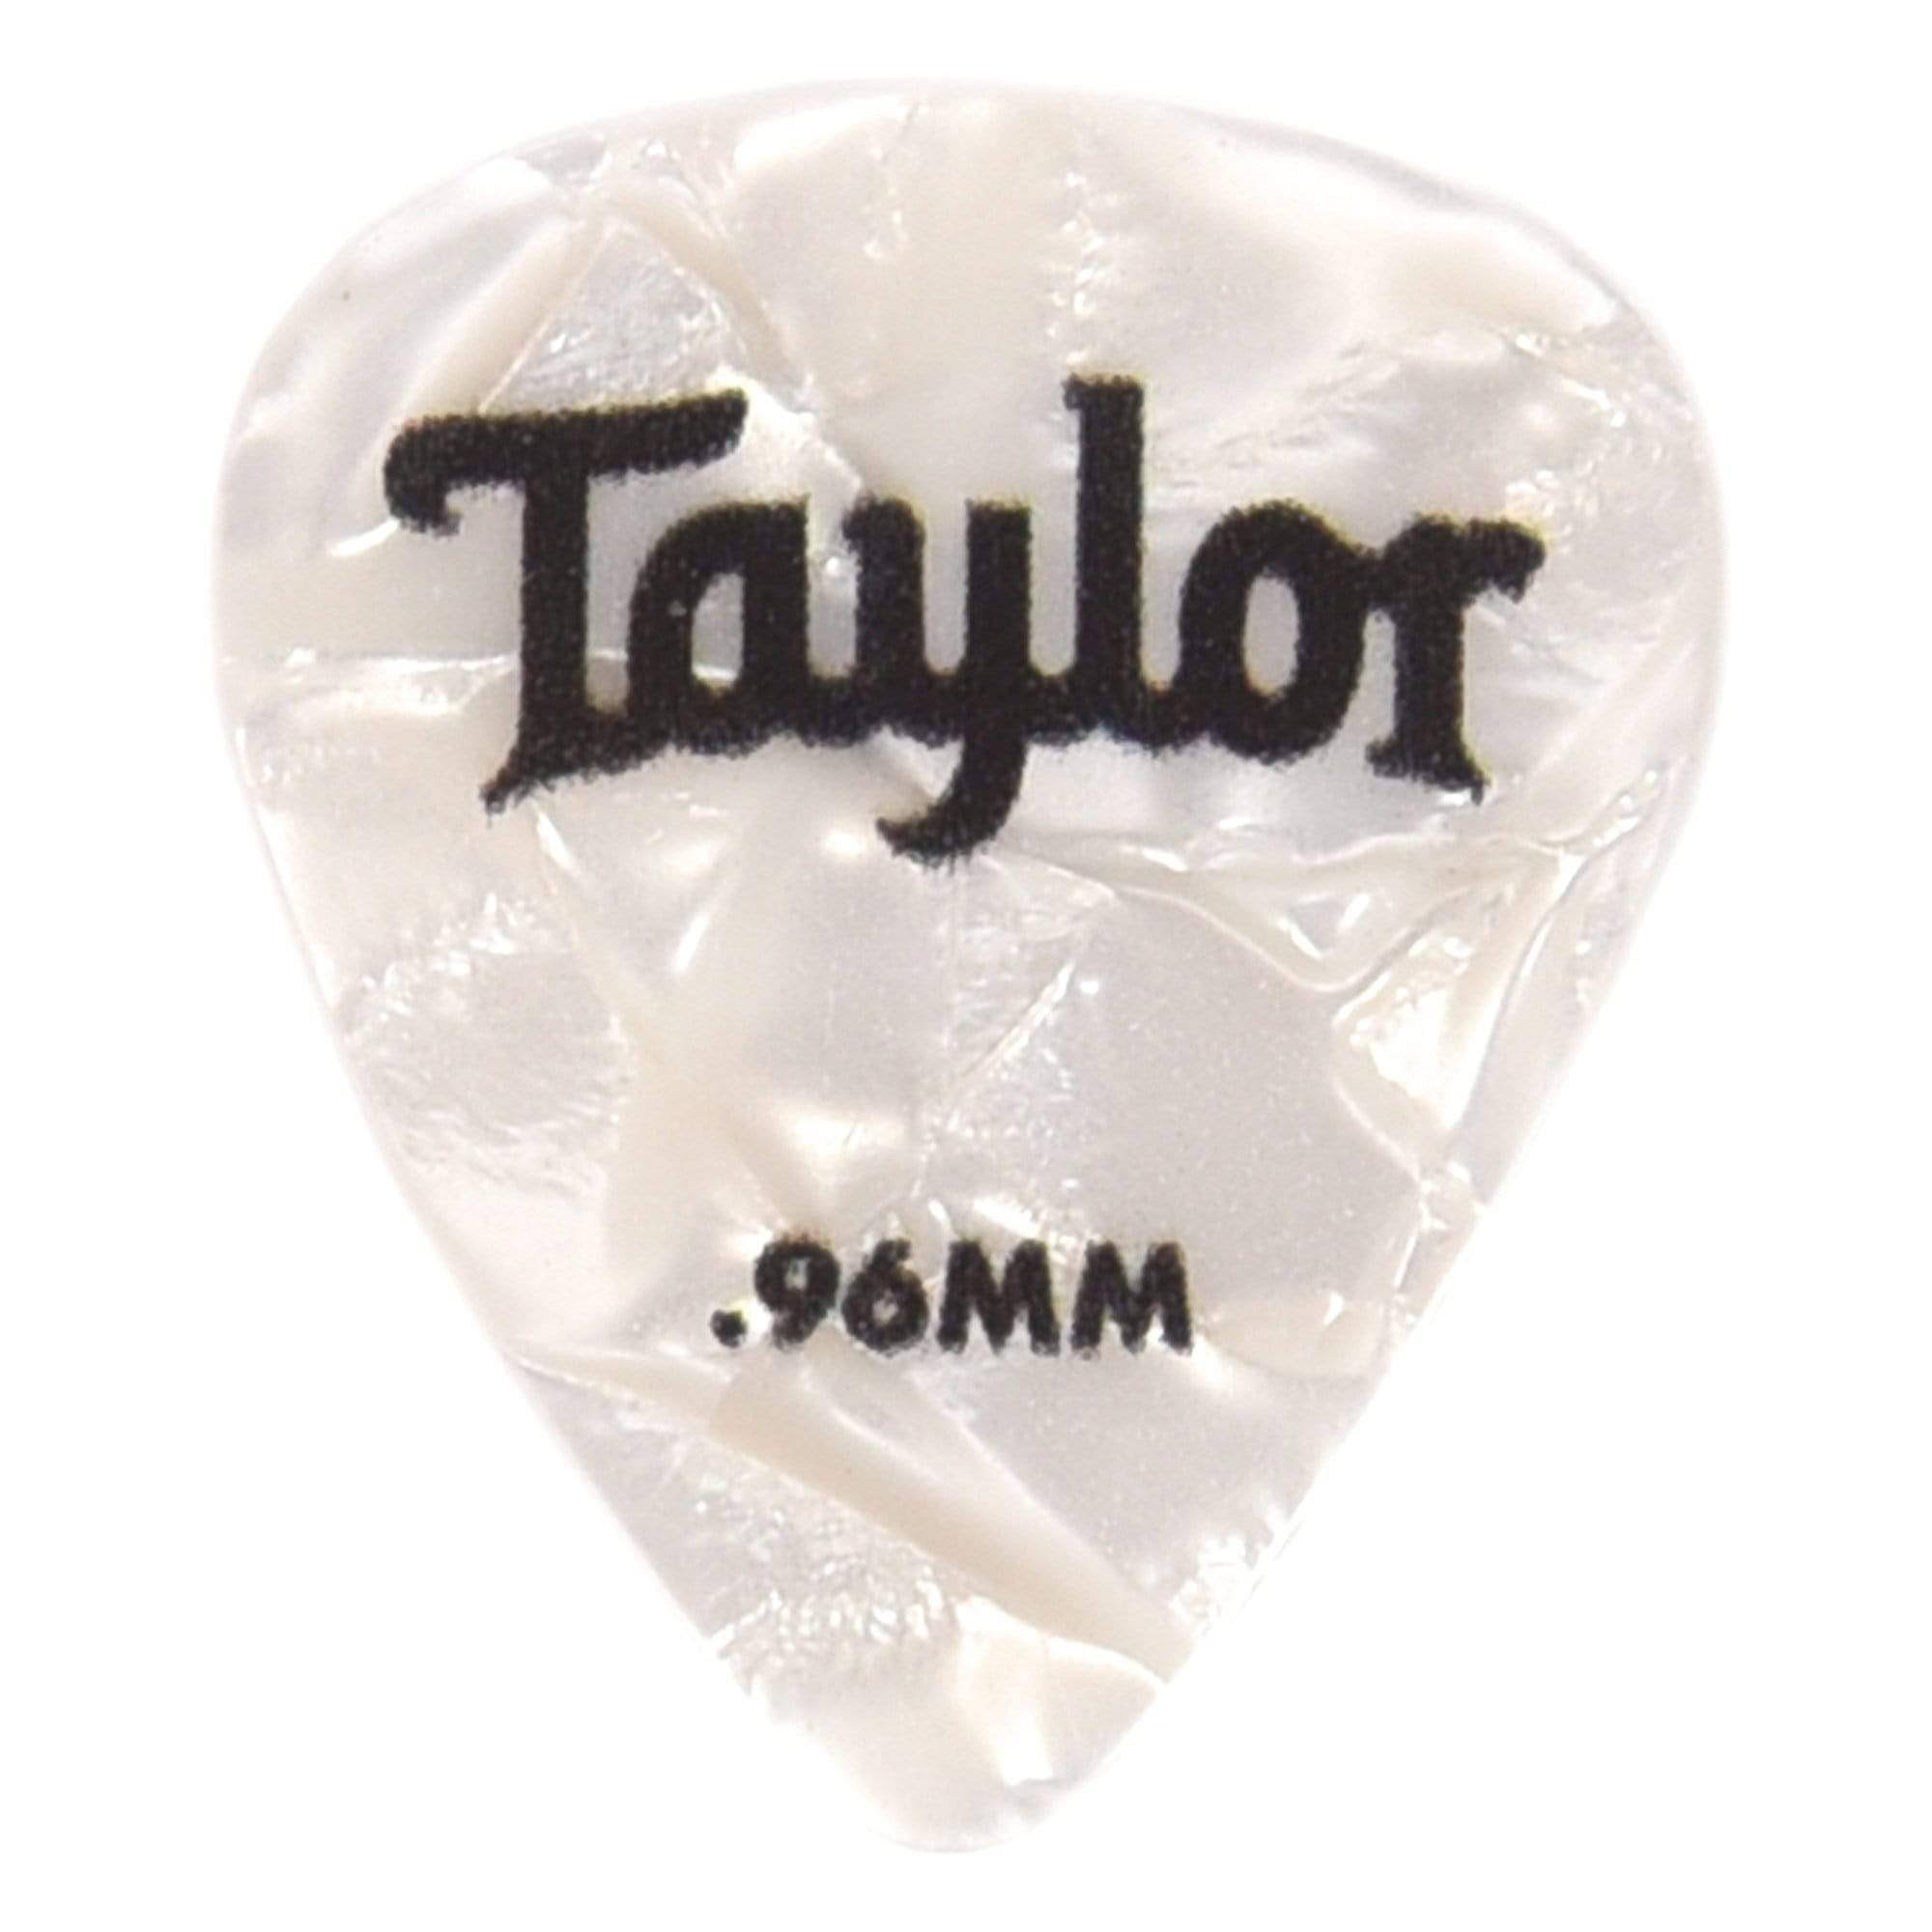 Taylor Picks - Celluloid 351, White Pearl, .96 mm, 12 Pack